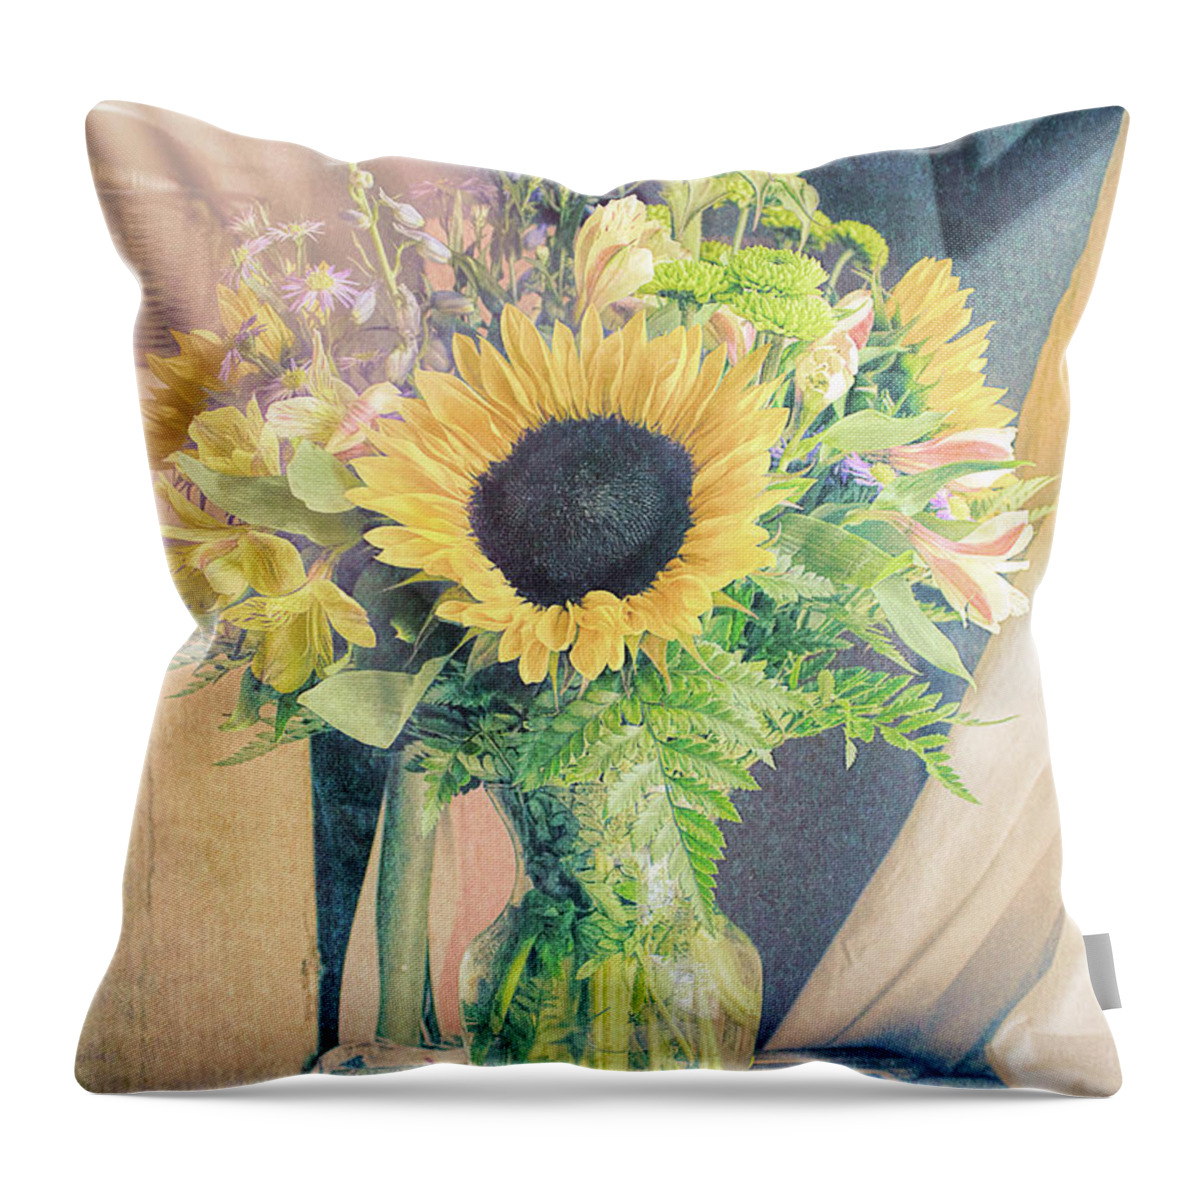 Reared In The Lap Of Summer Throw Pillow featuring the photograph Reared In The Lap Of Summer by Bellesouth Studio